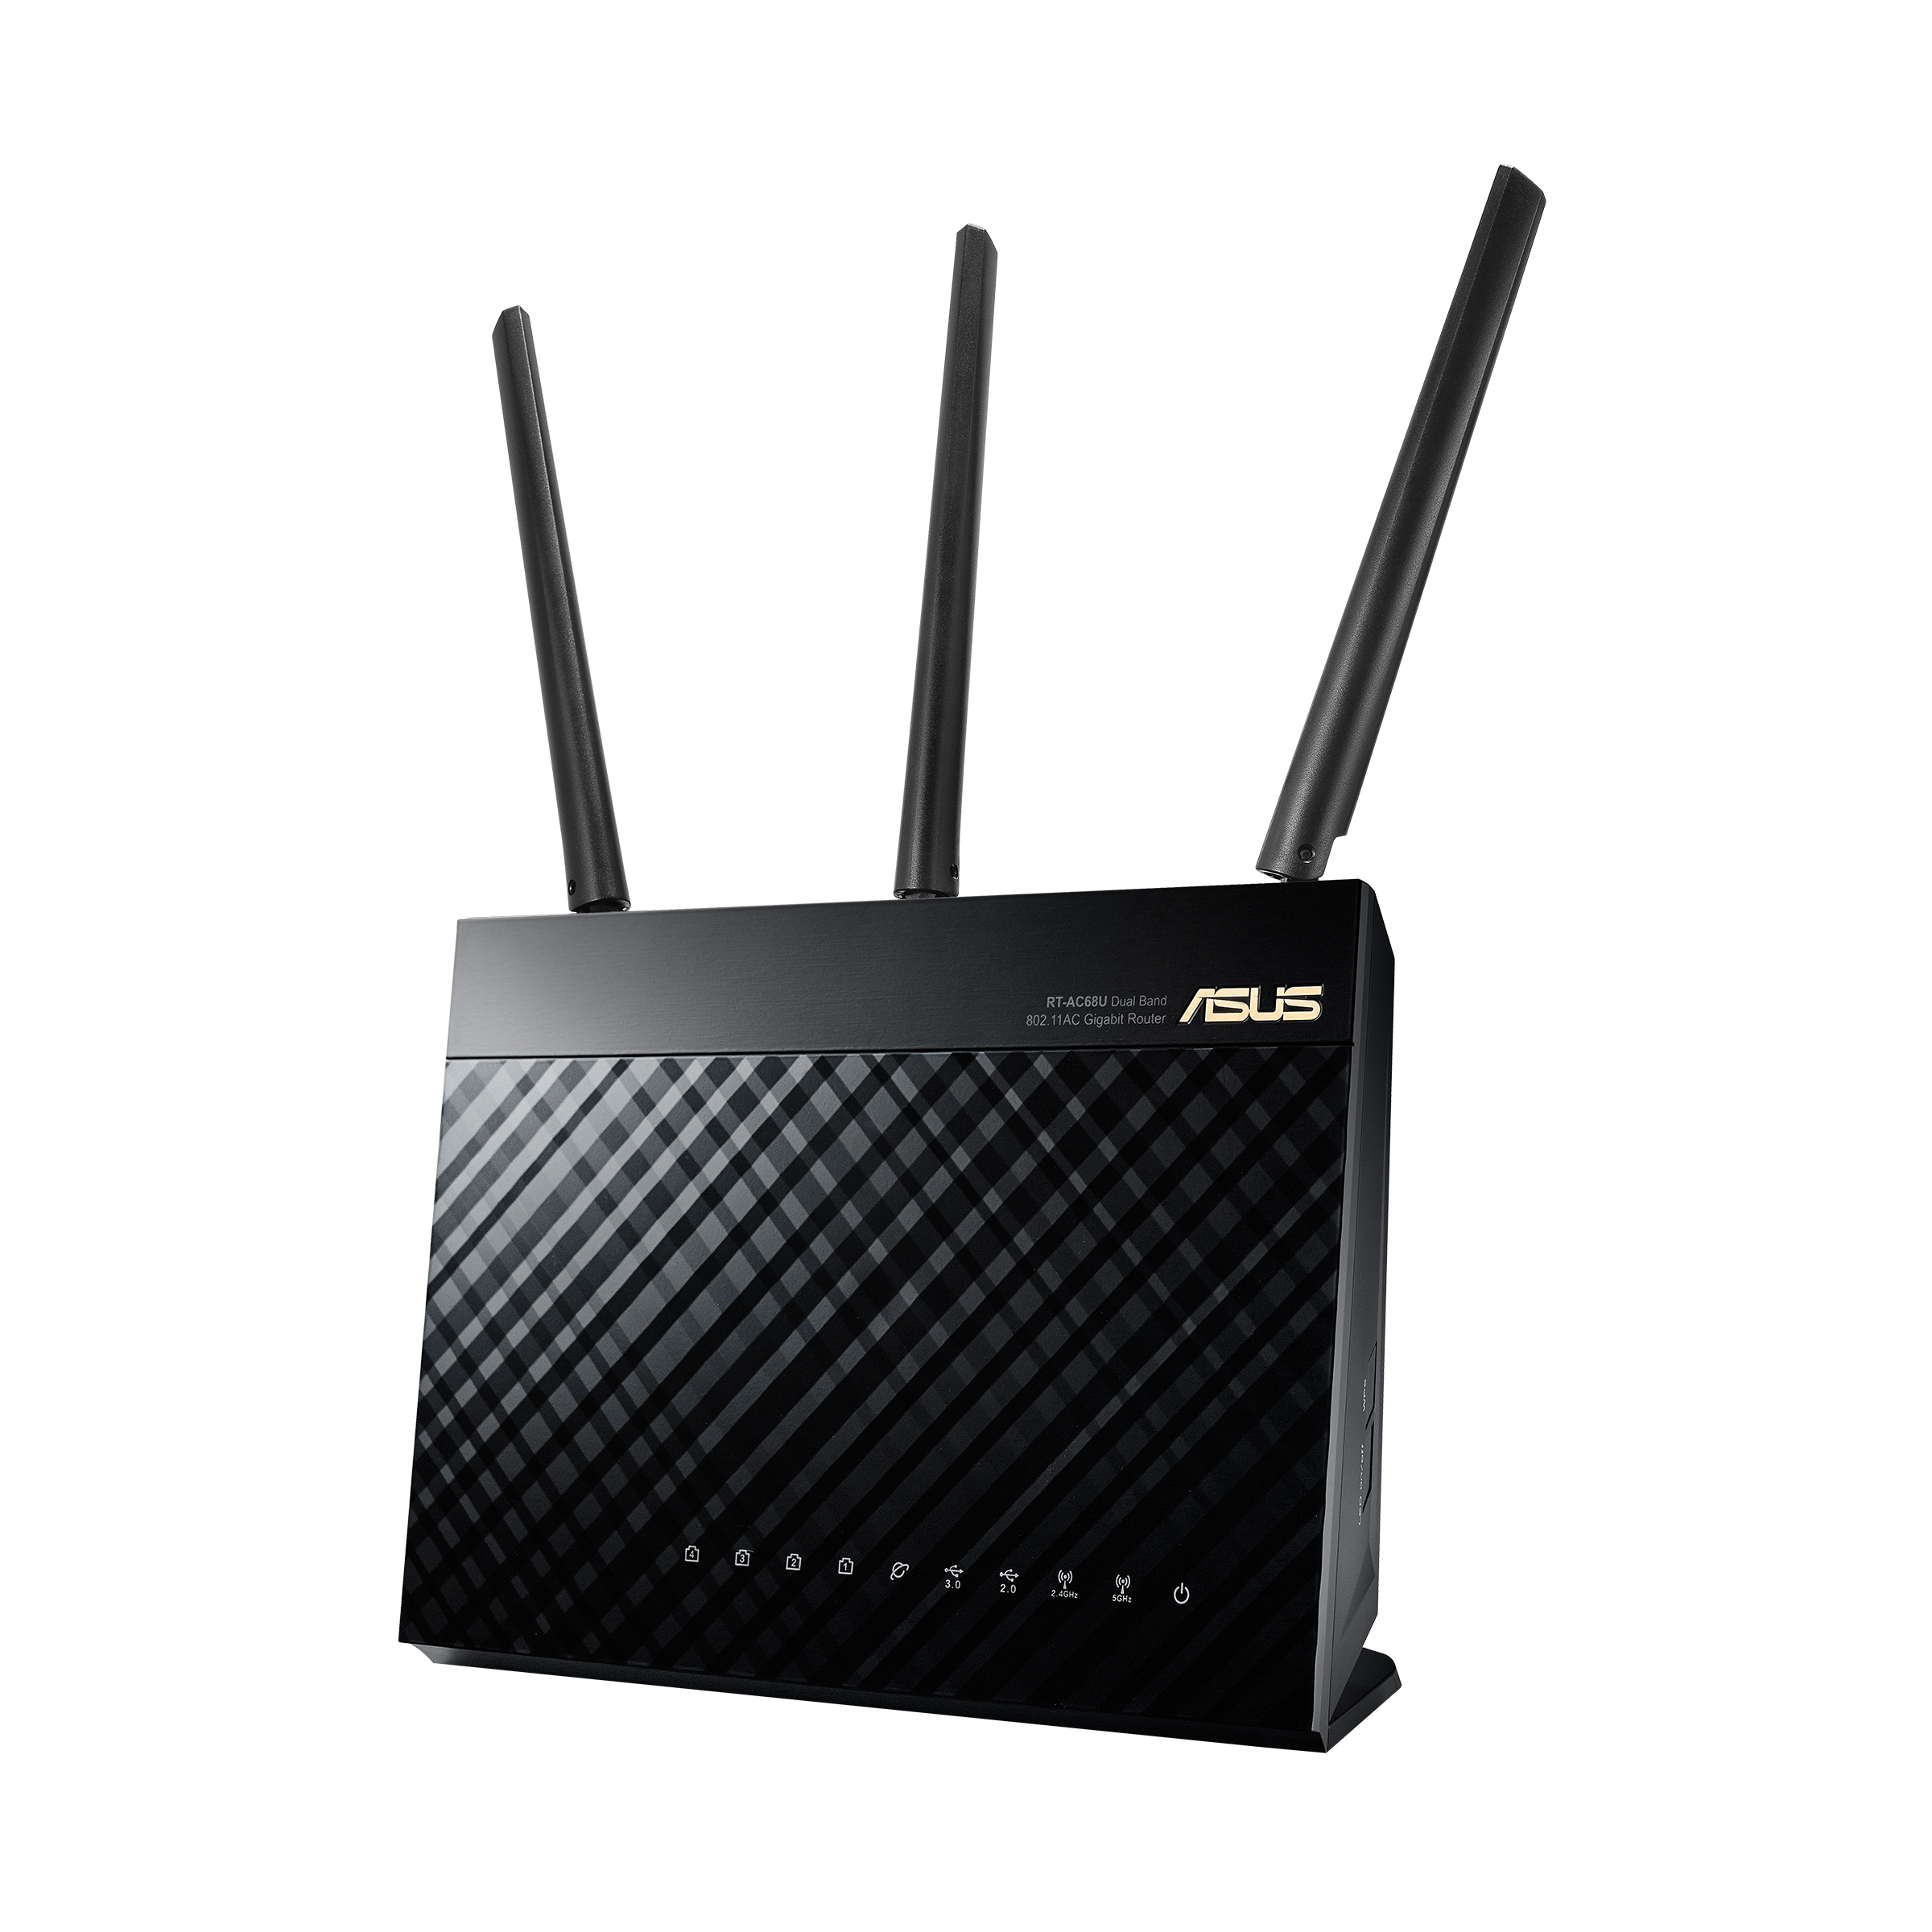 Rt-Ac68U｜Wifi Routers｜Asus Canada